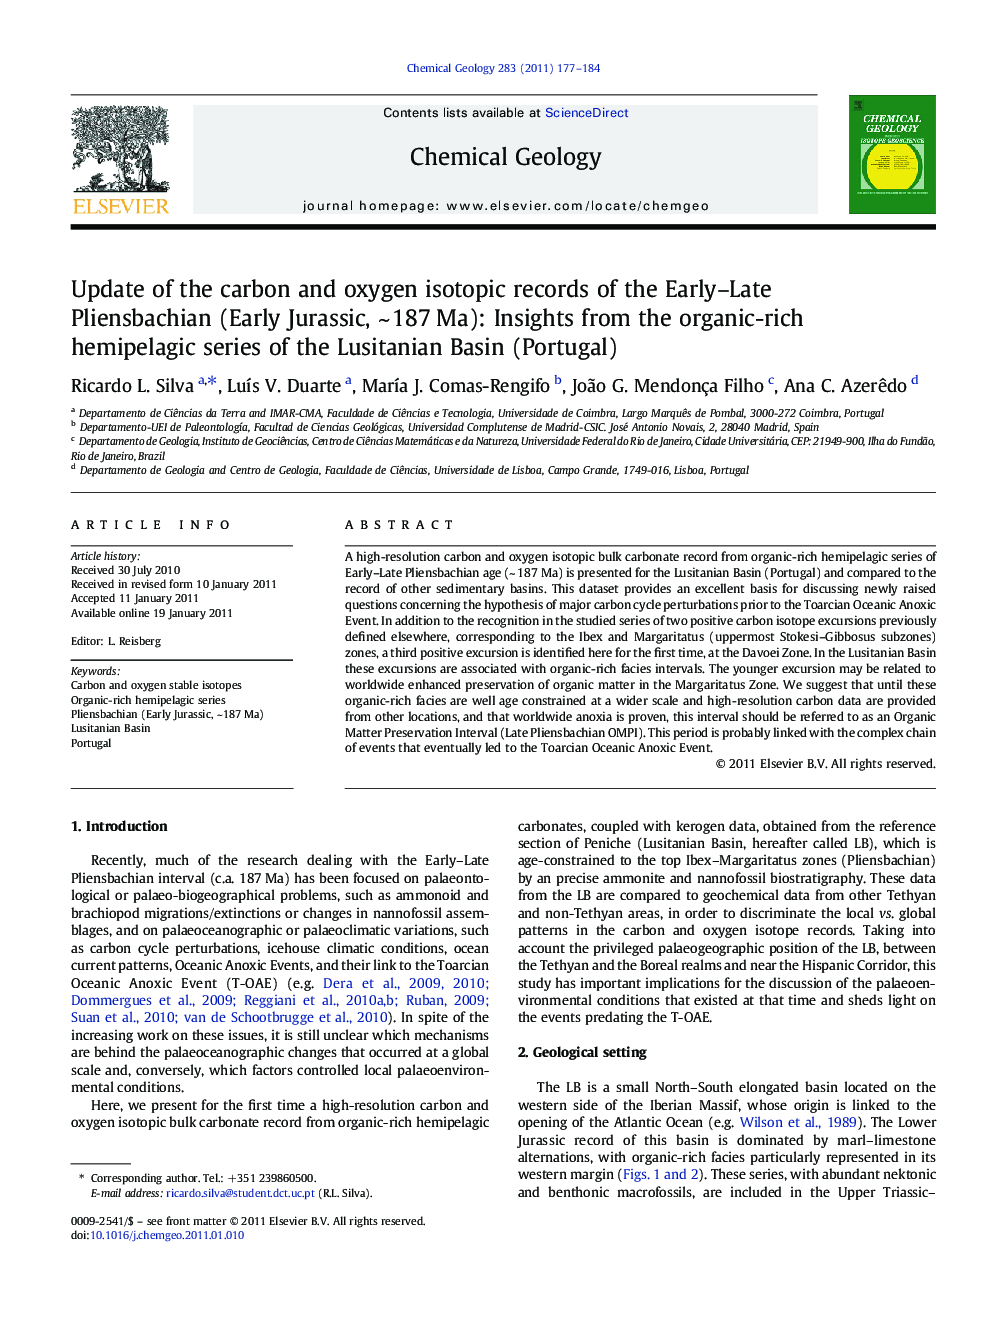 Update of the carbon and oxygen isotopic records of the Early–Late Pliensbachian (Early Jurassic, ~ 187 Ma): Insights from the organic-rich hemipelagic series of the Lusitanian Basin (Portugal)